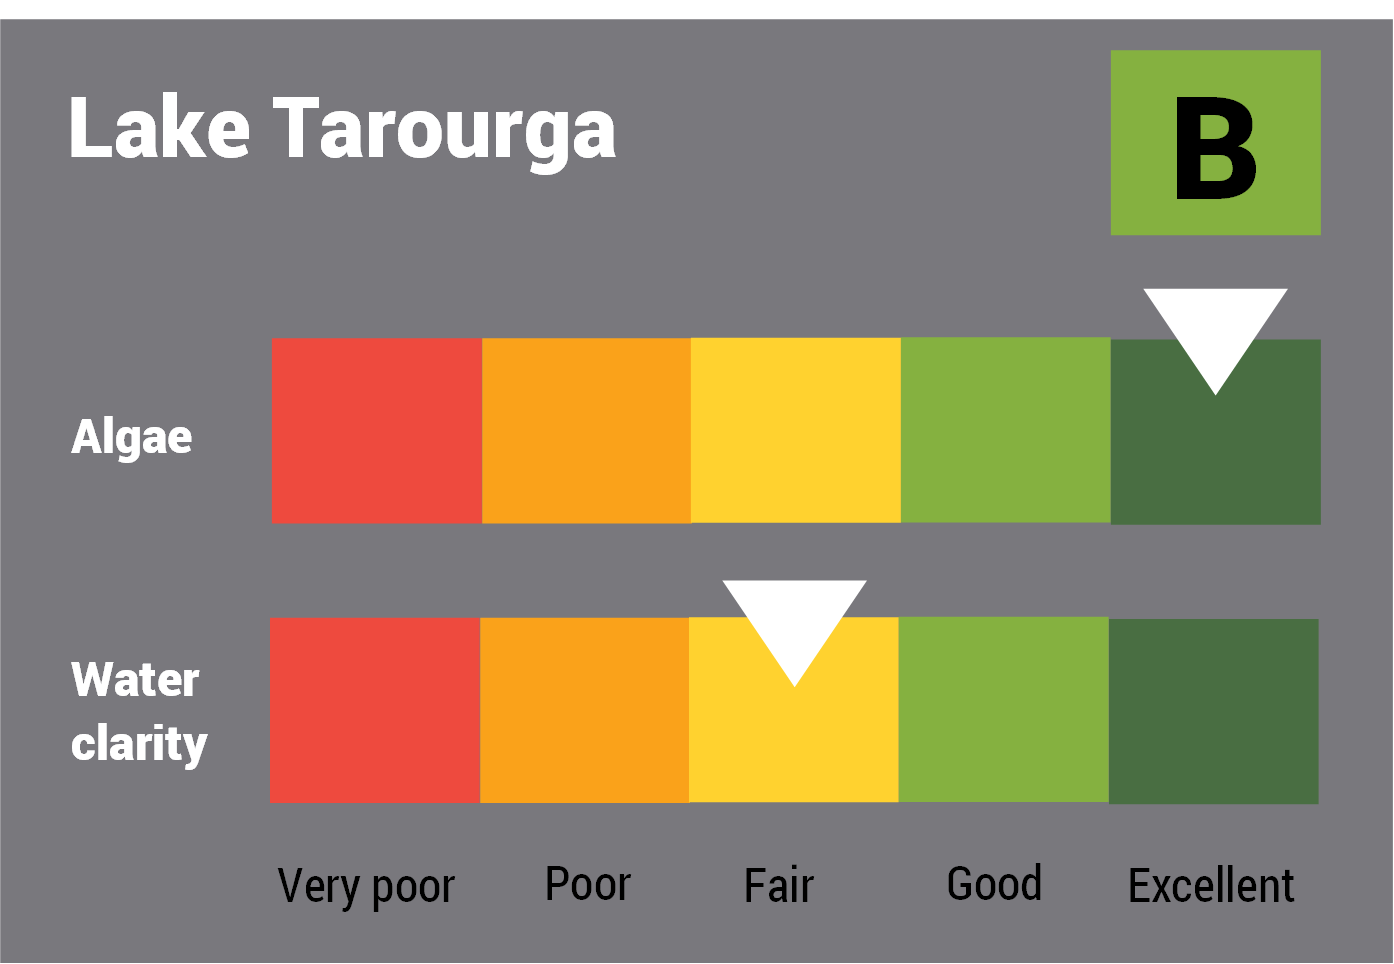 Lake Tarourga water quality report card for algae and water clarity showing colour-coded ratings (red, orange, yellow, light green and dark green, which represent very poor, poor, fair, good and excellent, respectively). Algae is rated 'fair' and water clarity is rated 'excellent' giving an overall rating of 'good' or 'B'.